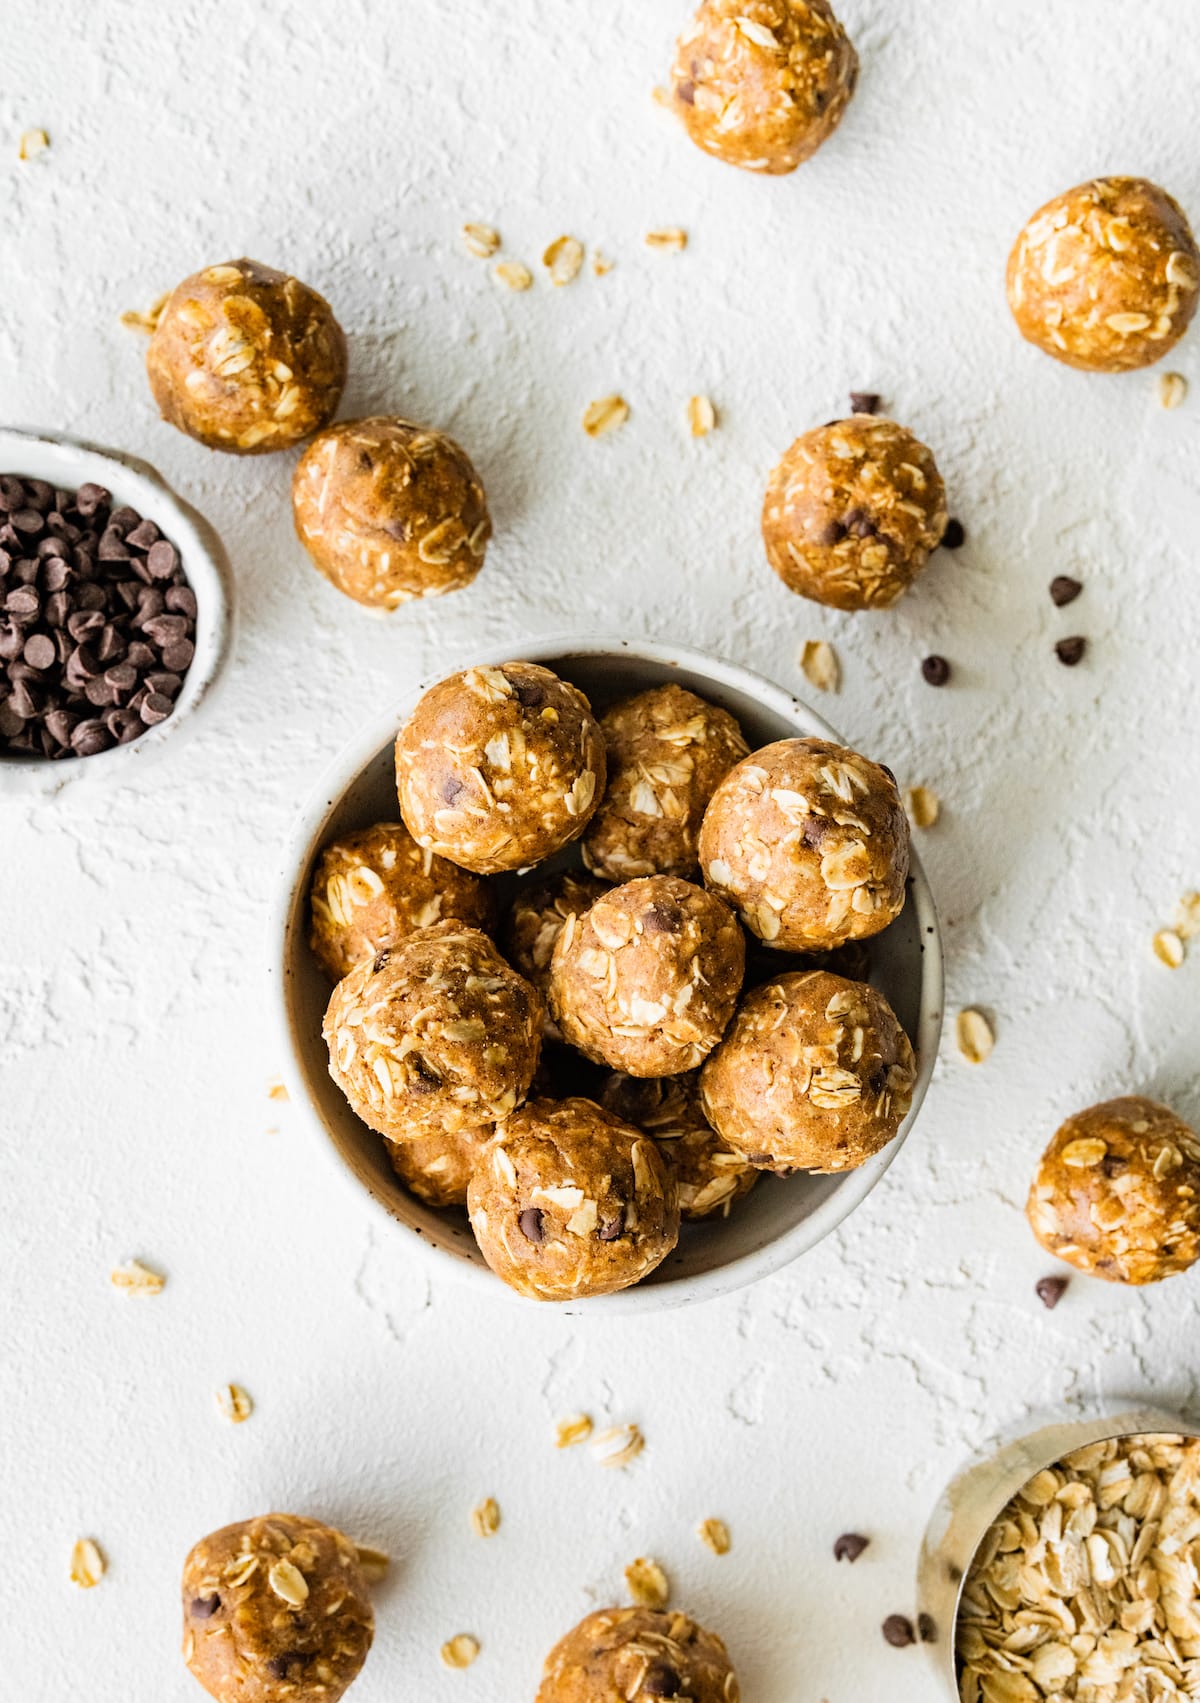 Vegan protein balls in a small bowl with some scattered on a table.